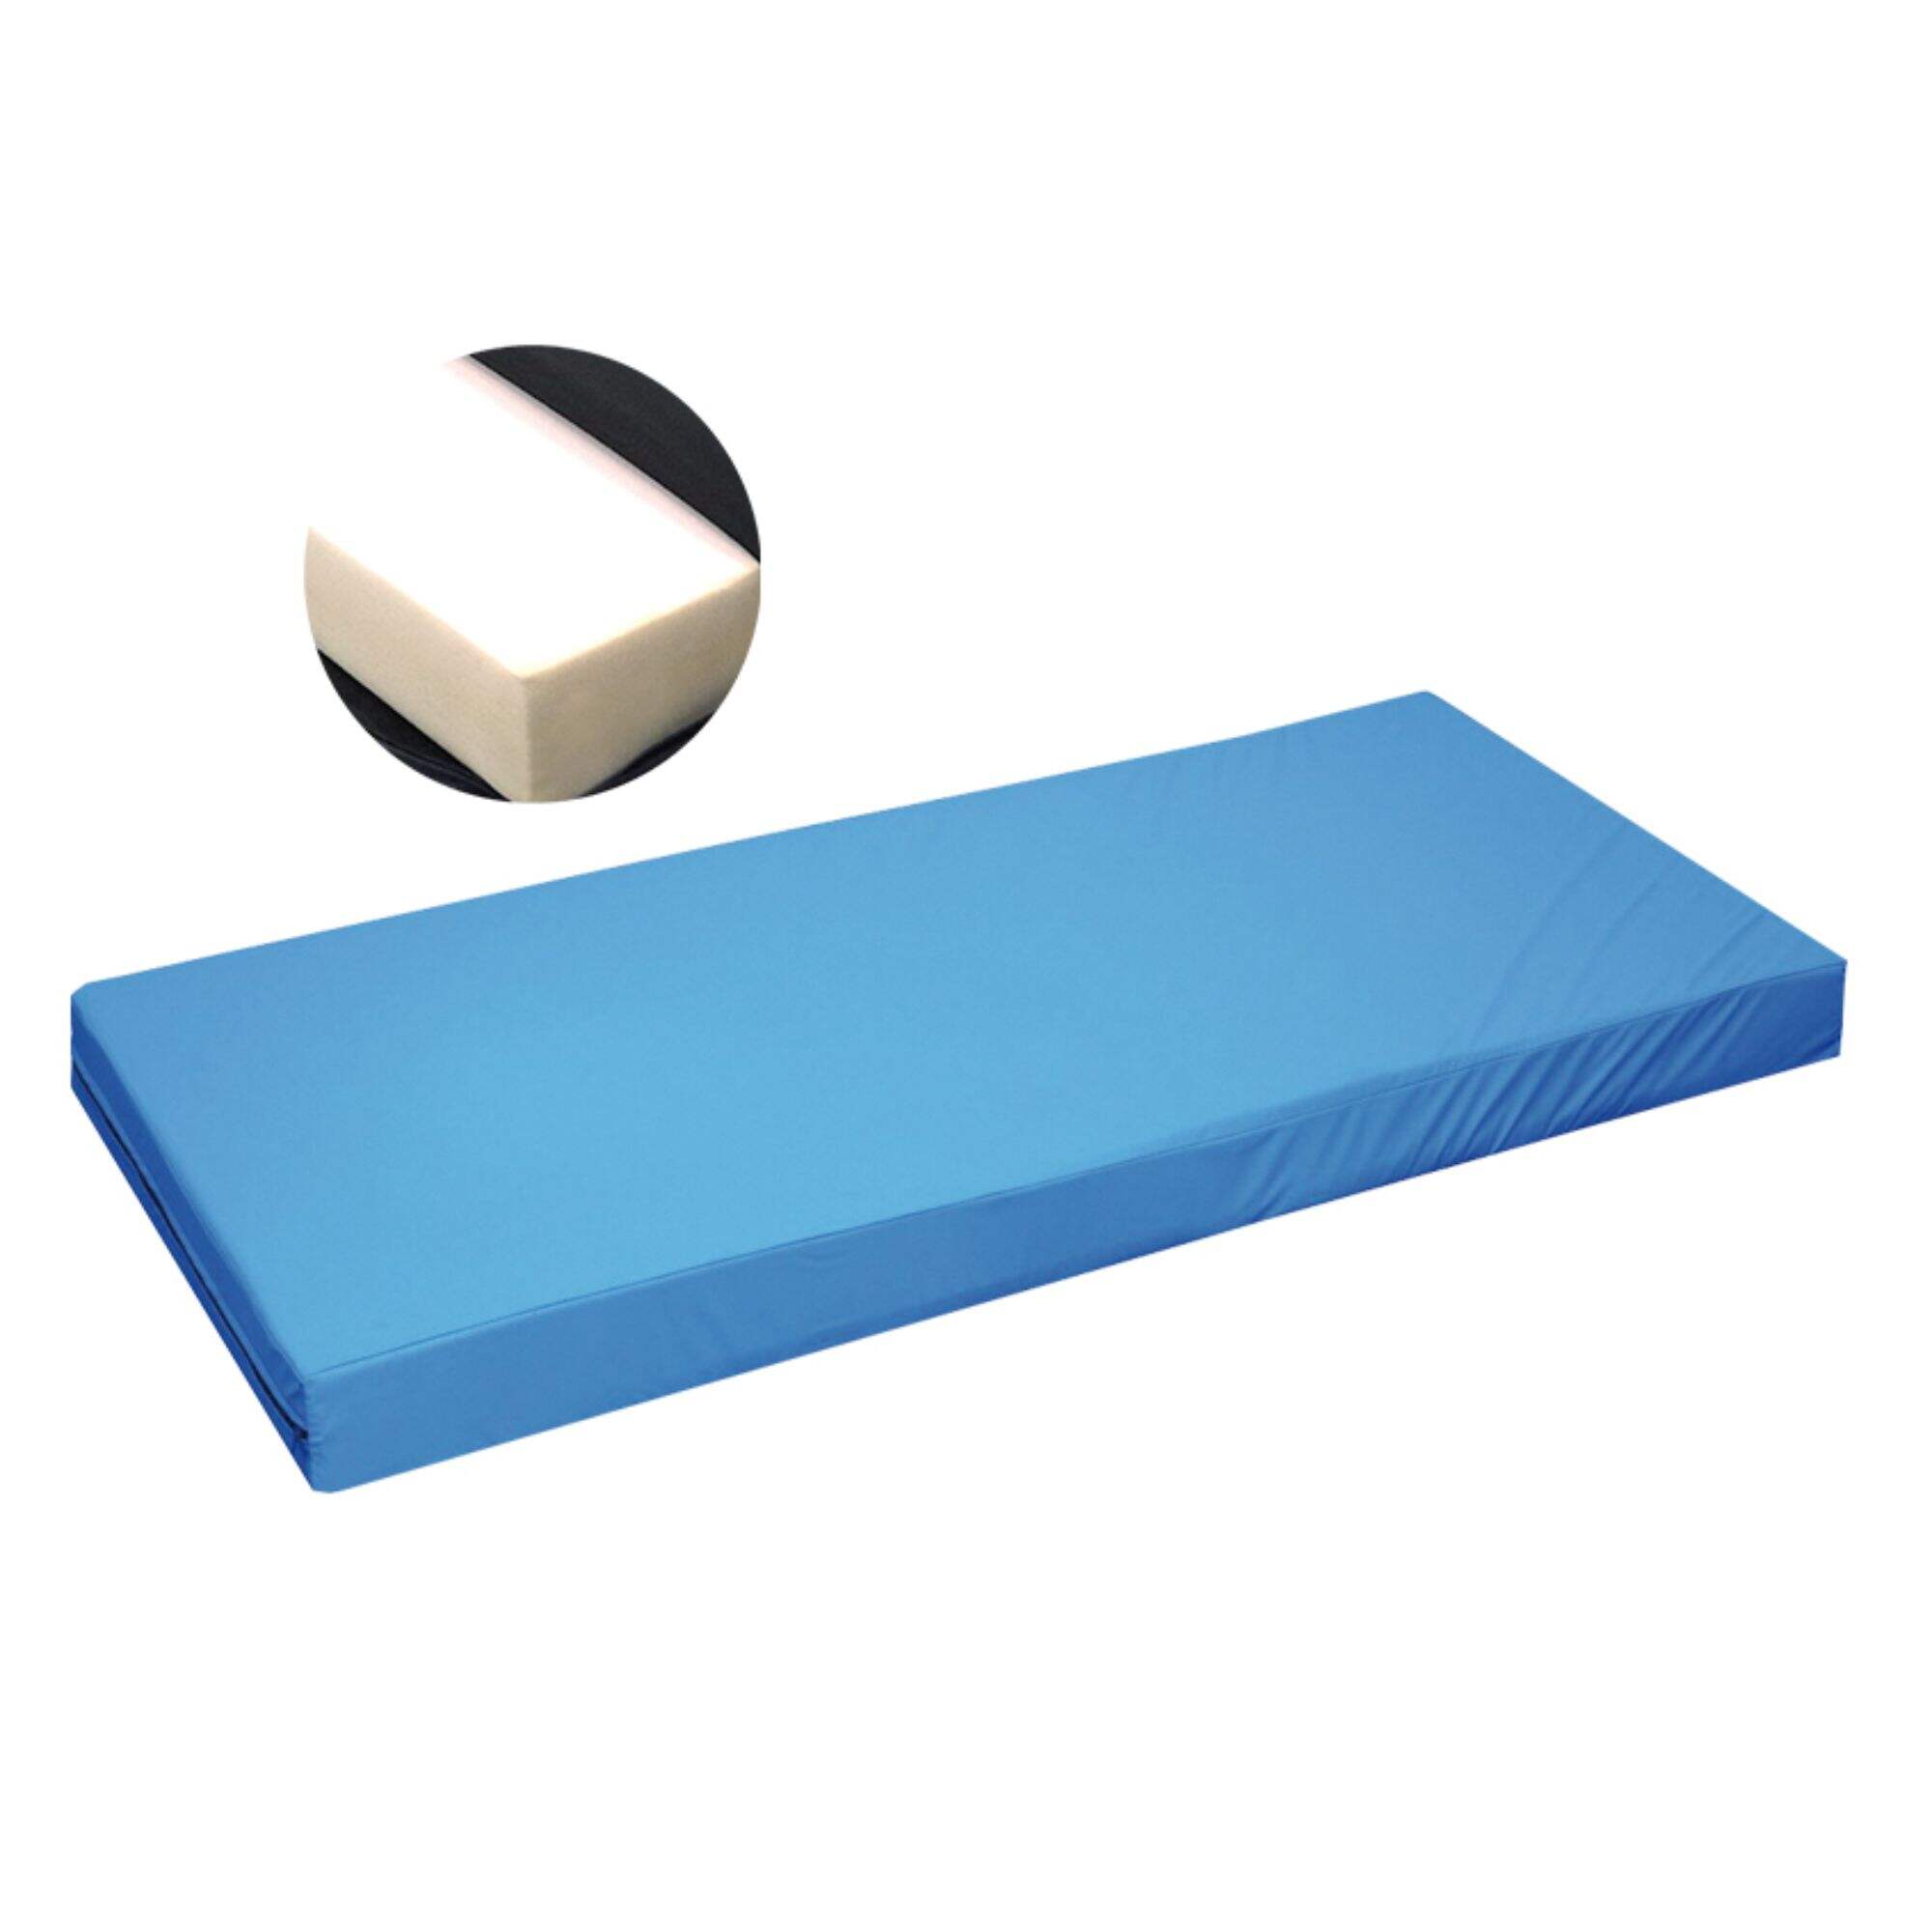 YFM004 Mattress With Oxford Cover